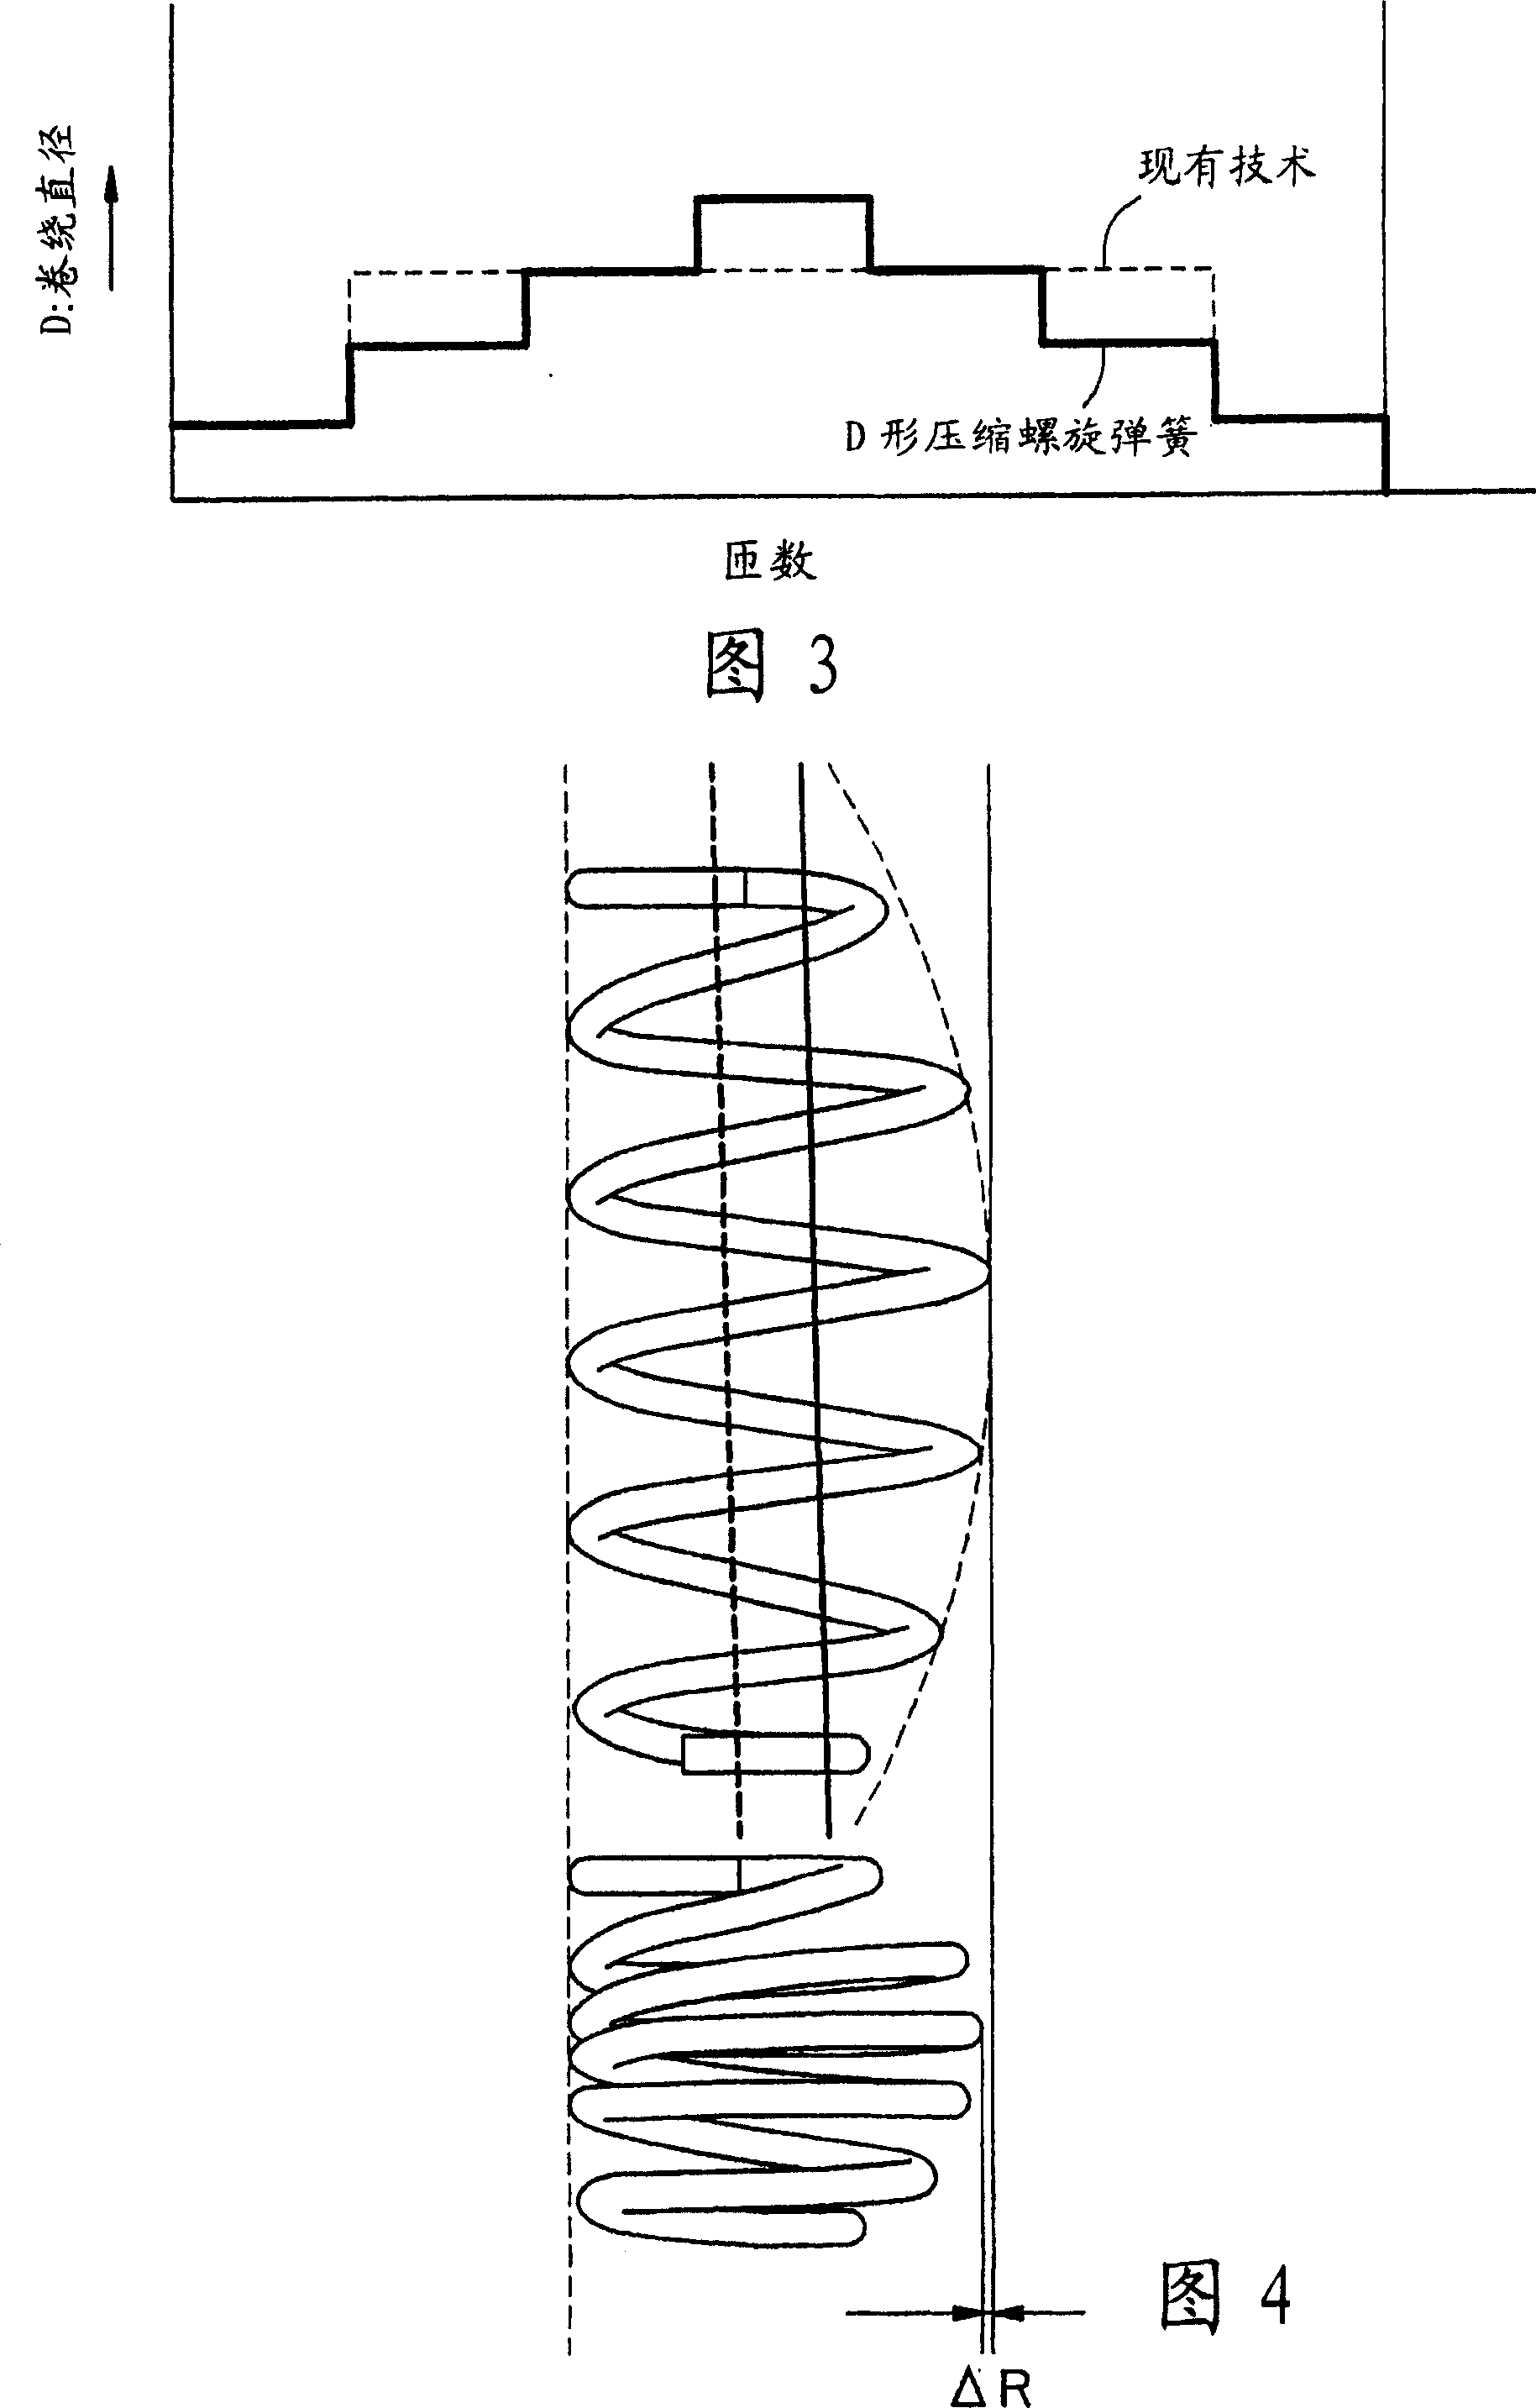 Helical spring and suspension gear